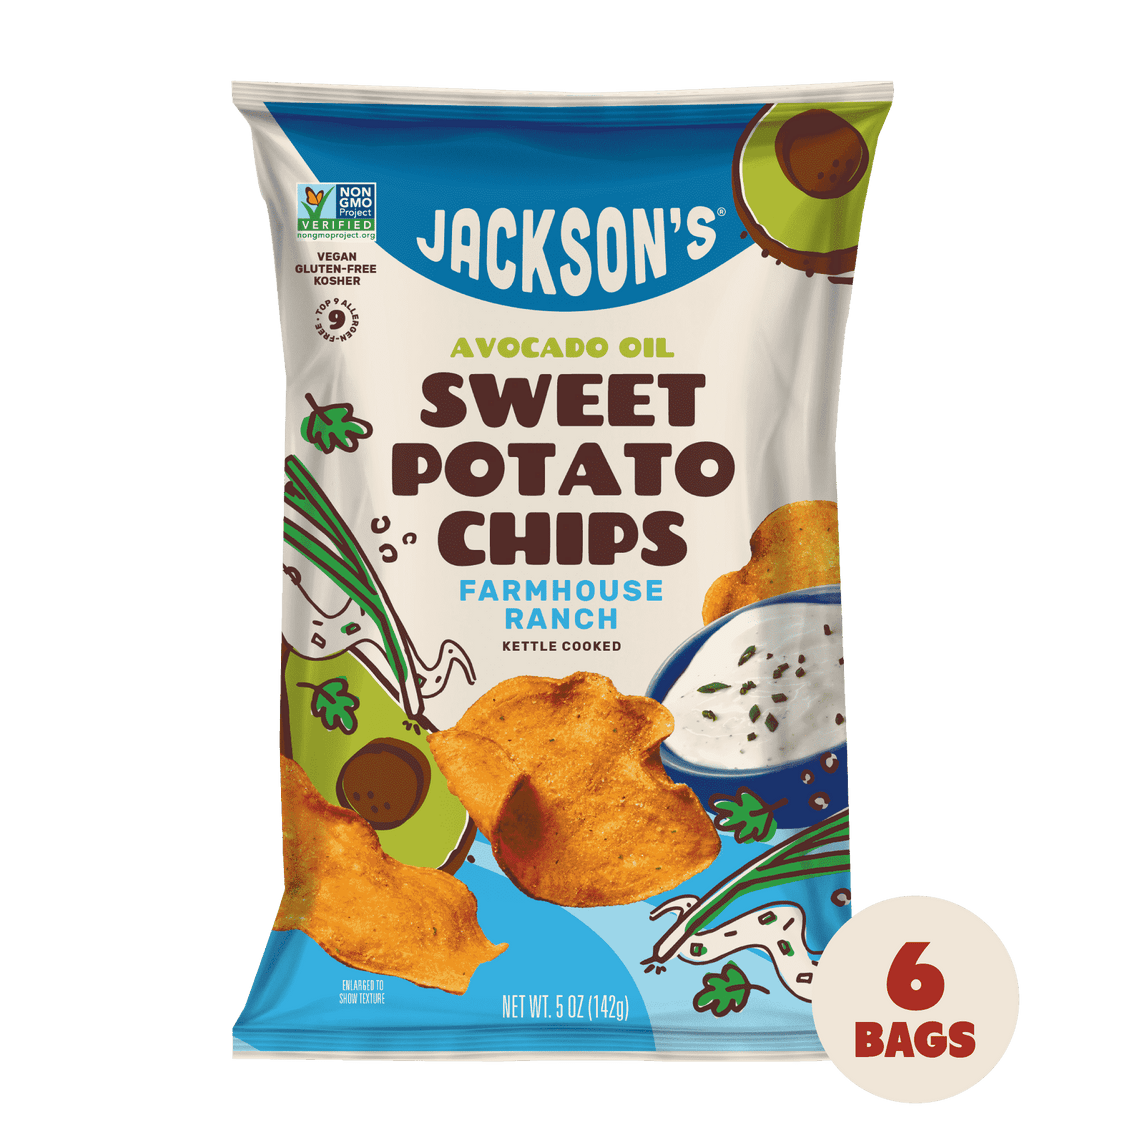 Delicious and tasty Farmhouse Ranch flavored kettle cooked Sweet Potato Chips with avocado oil. Non-GMO. Vegan. Gluten-free.